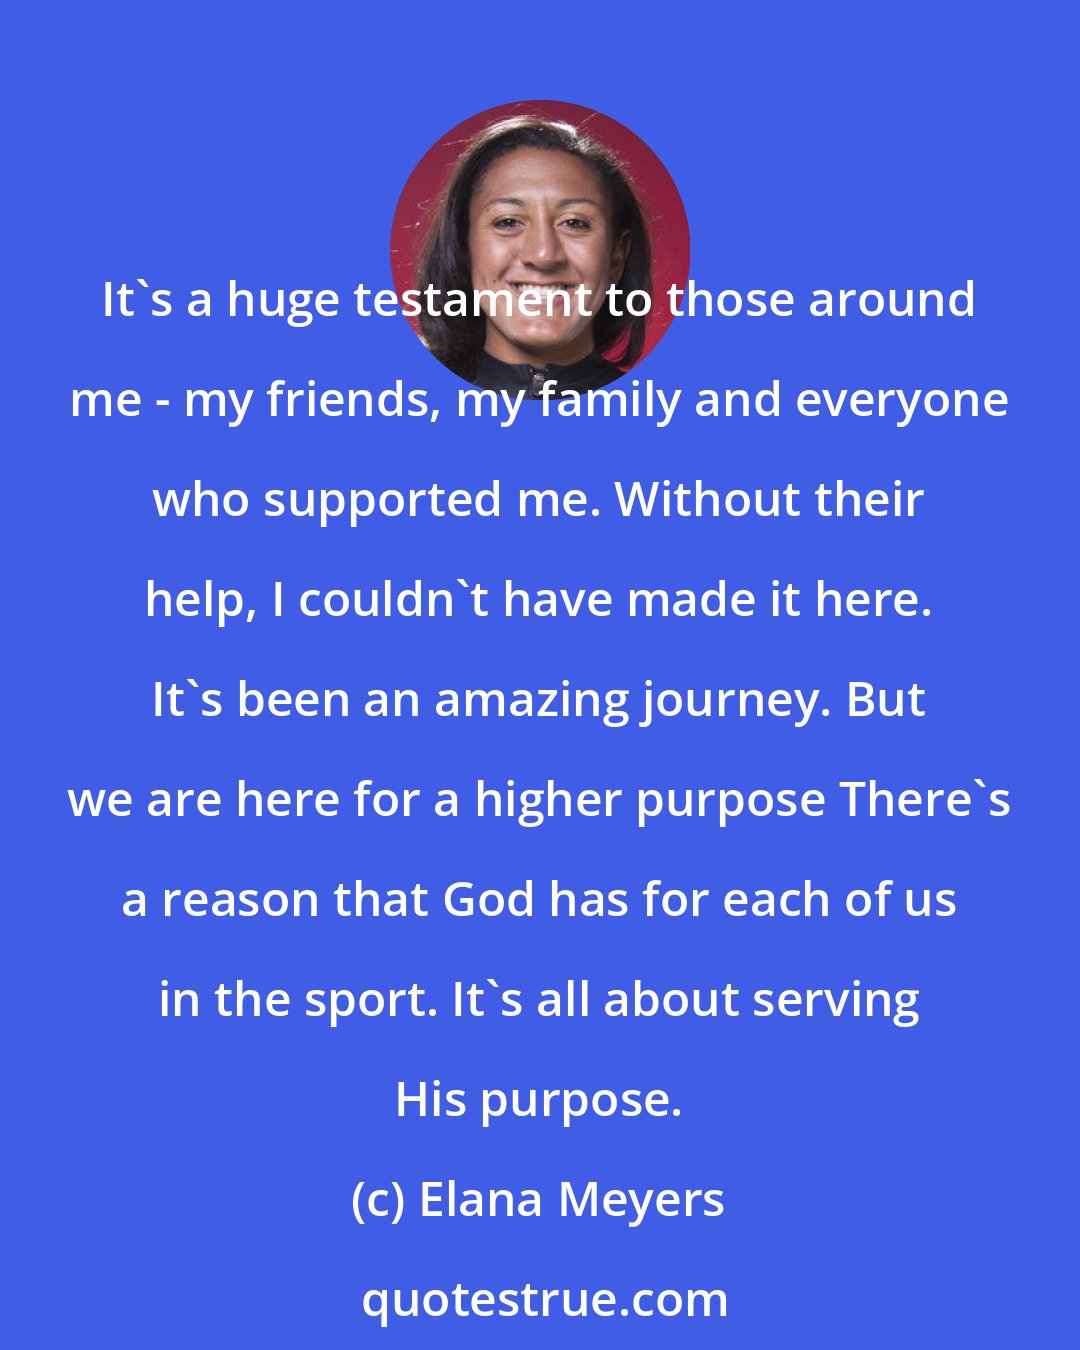 Elana Meyers: It's a huge testament to those around me - my friends, my family and everyone who supported me. Without their help, I couldn't have made it here. It's been an amazing journey. But we are here for a higher purpose There's a reason that God has for each of us in the sport. It's all about serving His purpose.